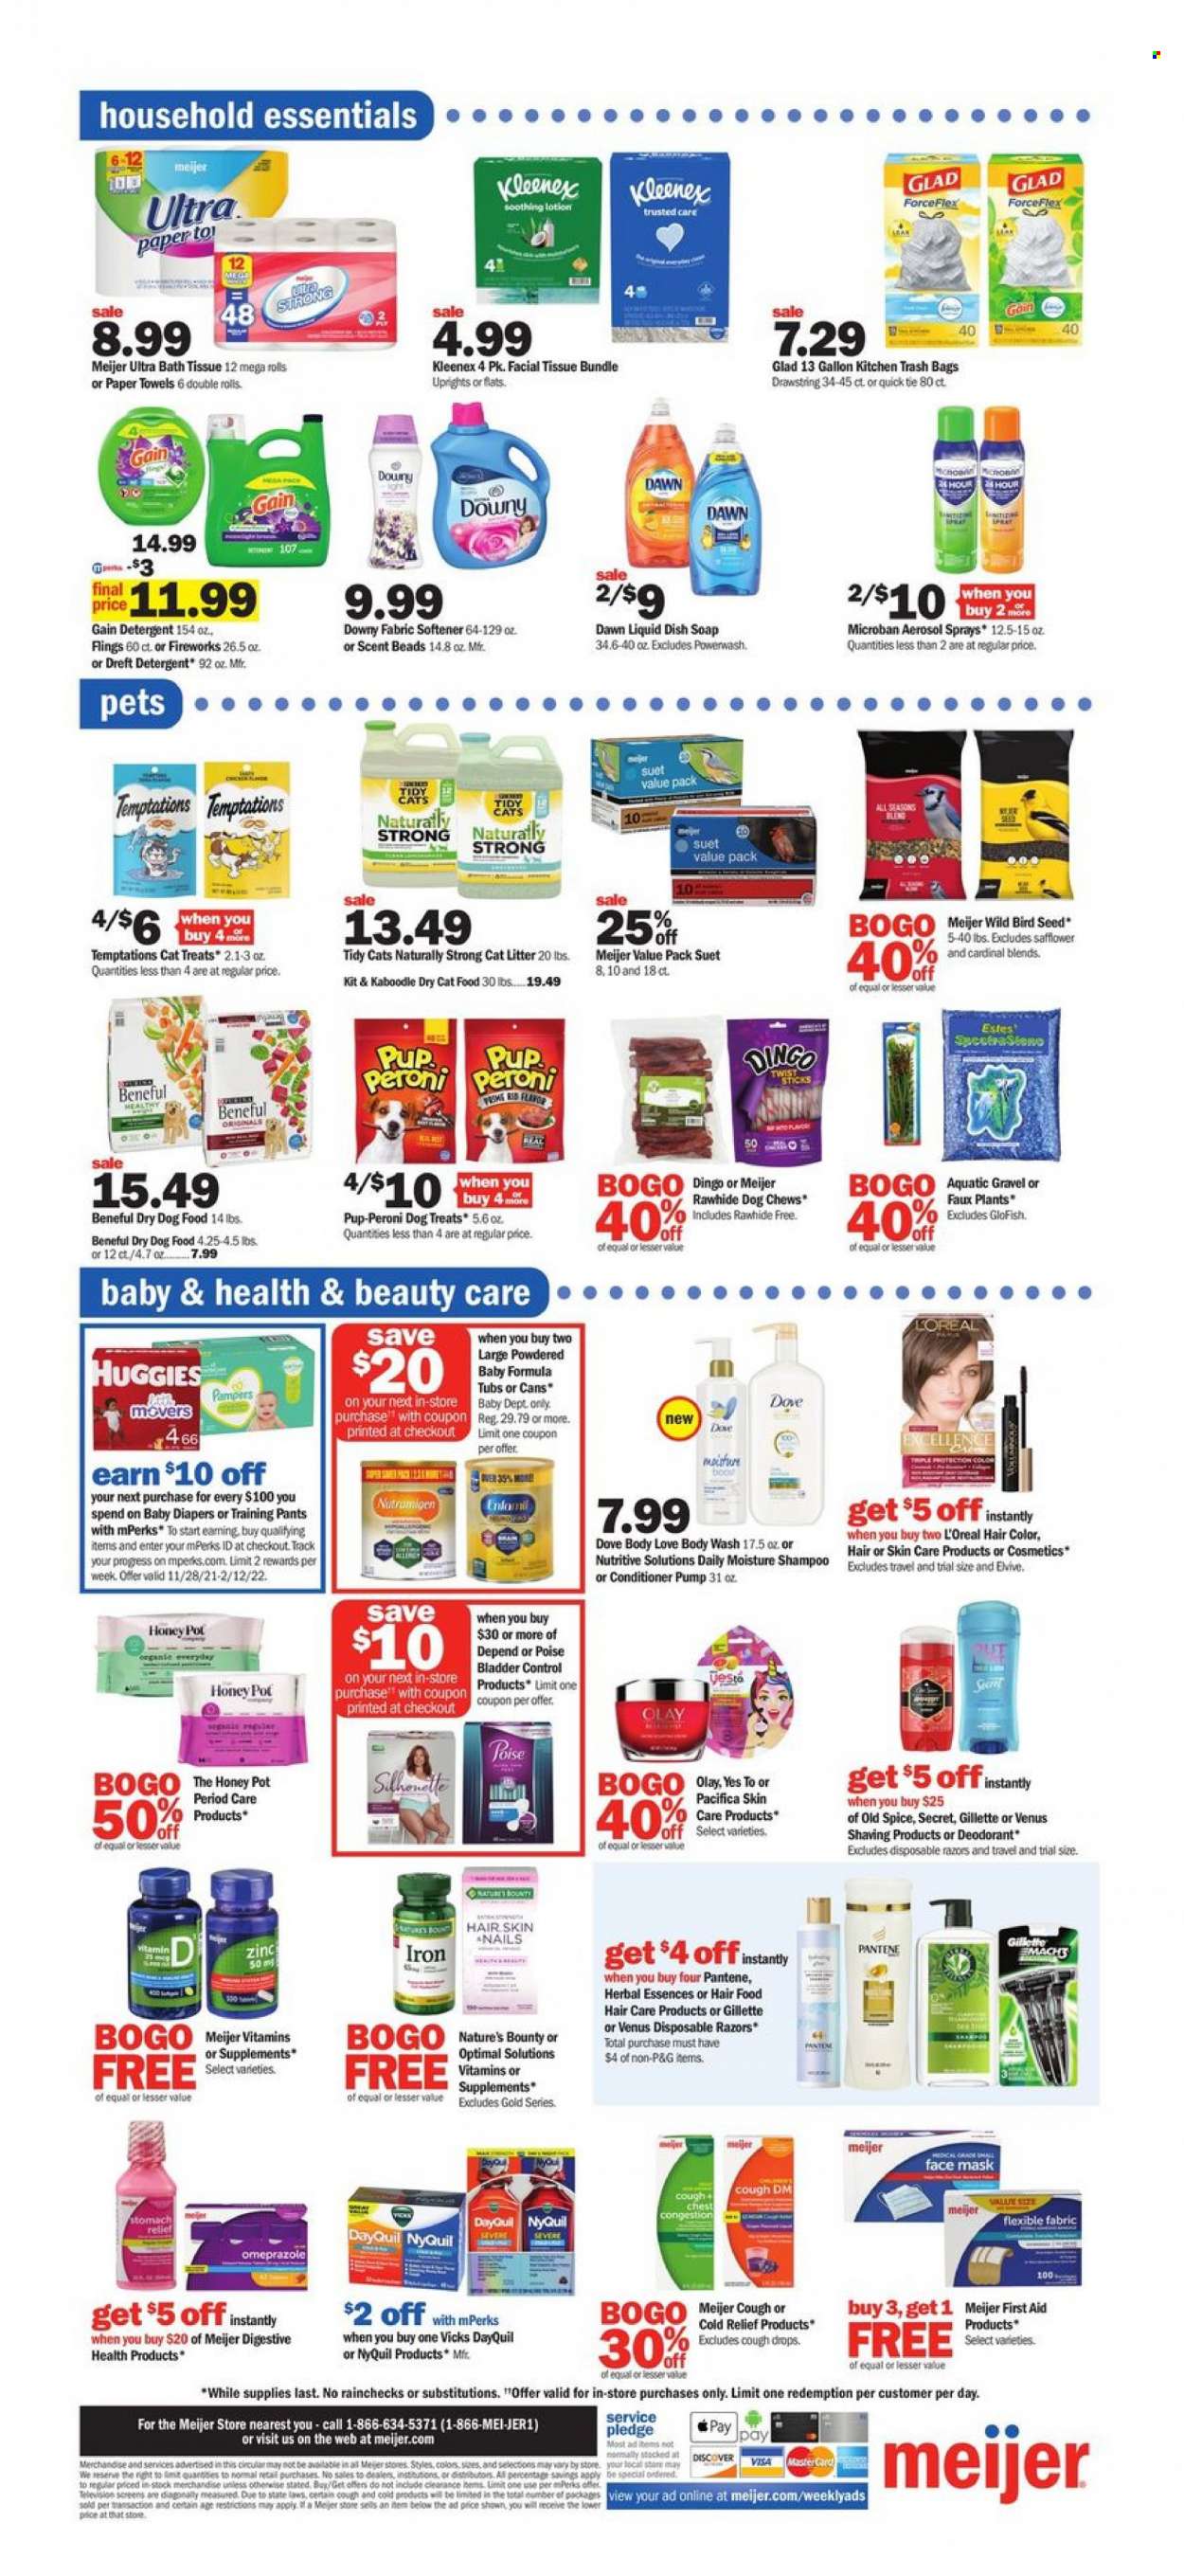 thumbnail - Meijer Flyer - 01/16/2022 - 01/22/2022 - Sales products - suet, spice, Huggies, Pampers, pants, nappies, baby pants, bath tissue, Kleenex, kitchen towels, paper towels, Honey Pot, detergent, Gain, Pledge, fabric softener, Downy Laundry, body wash, Dove, shampoo, Old Spice, soap, L’Oréal, Olay, face mask, conditioner, Pantene, hair color, Herbal Essences, body lotion, anti-perspirant, deodorant, Gillette, Venus, disposable razor, Vicks, trash bags, gallon, pot, cat litter, animal food, animal treats, bird food, cat food, dog food, dry dog food, dog chews, dry cat food, Pup-Peroni, DayQuil, Nature's Bounty, NyQuil, zinc, cough drops. Page 14.